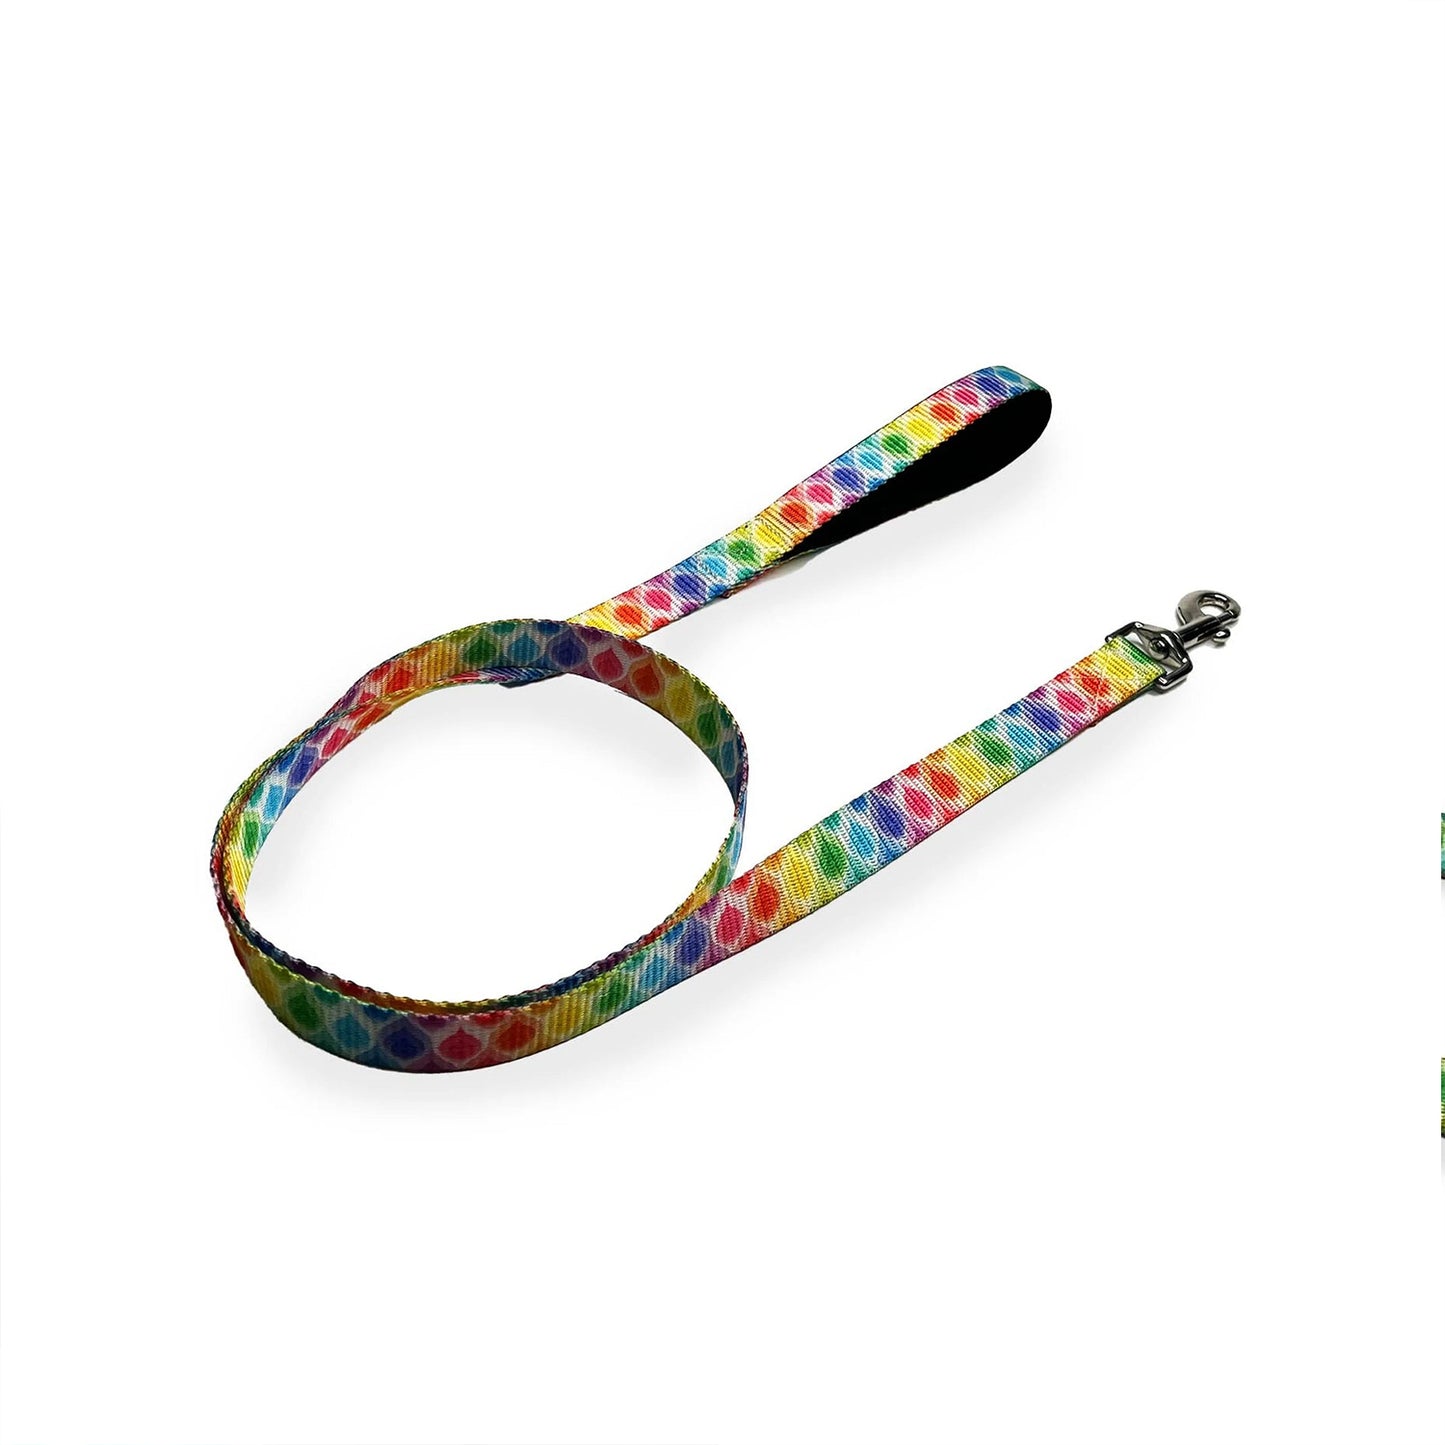 Forfurs - Candy Pop Standard Leash For Dogs & Cats